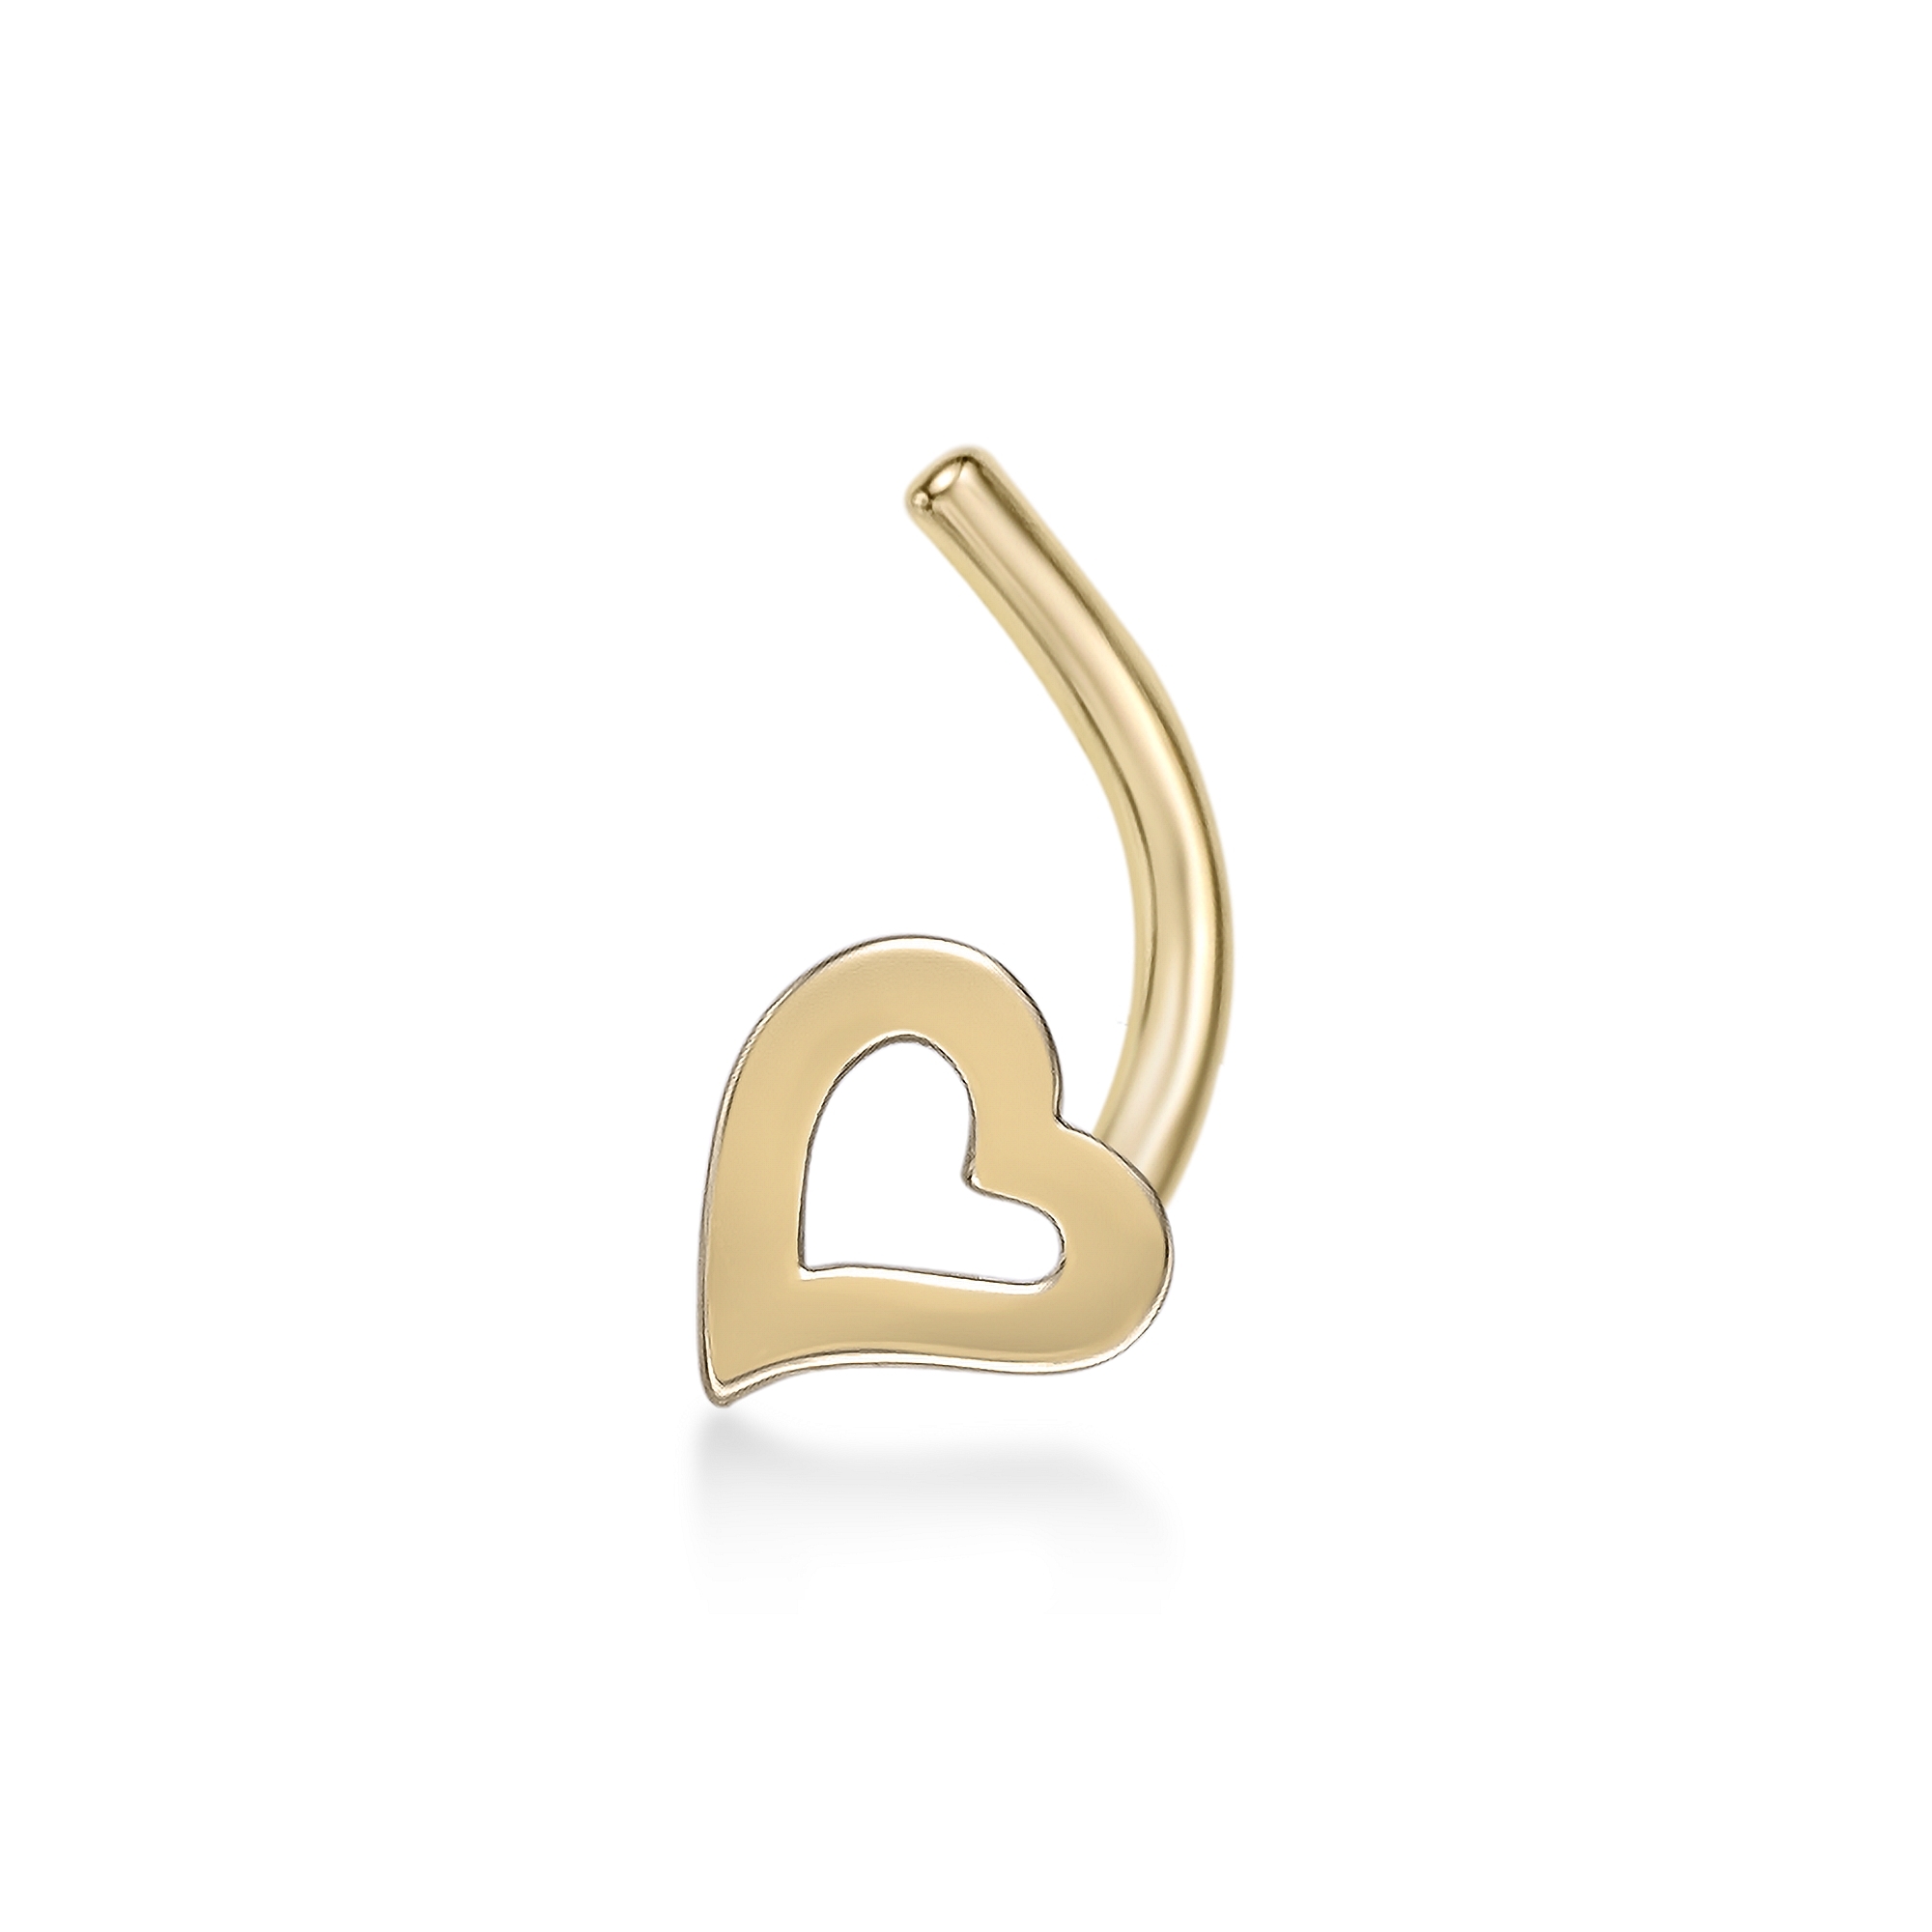 Lavari Jewelers Women's 3.6 MM Heart Curved Nose Ring, 14K Yellow Gold, 20 Gauge